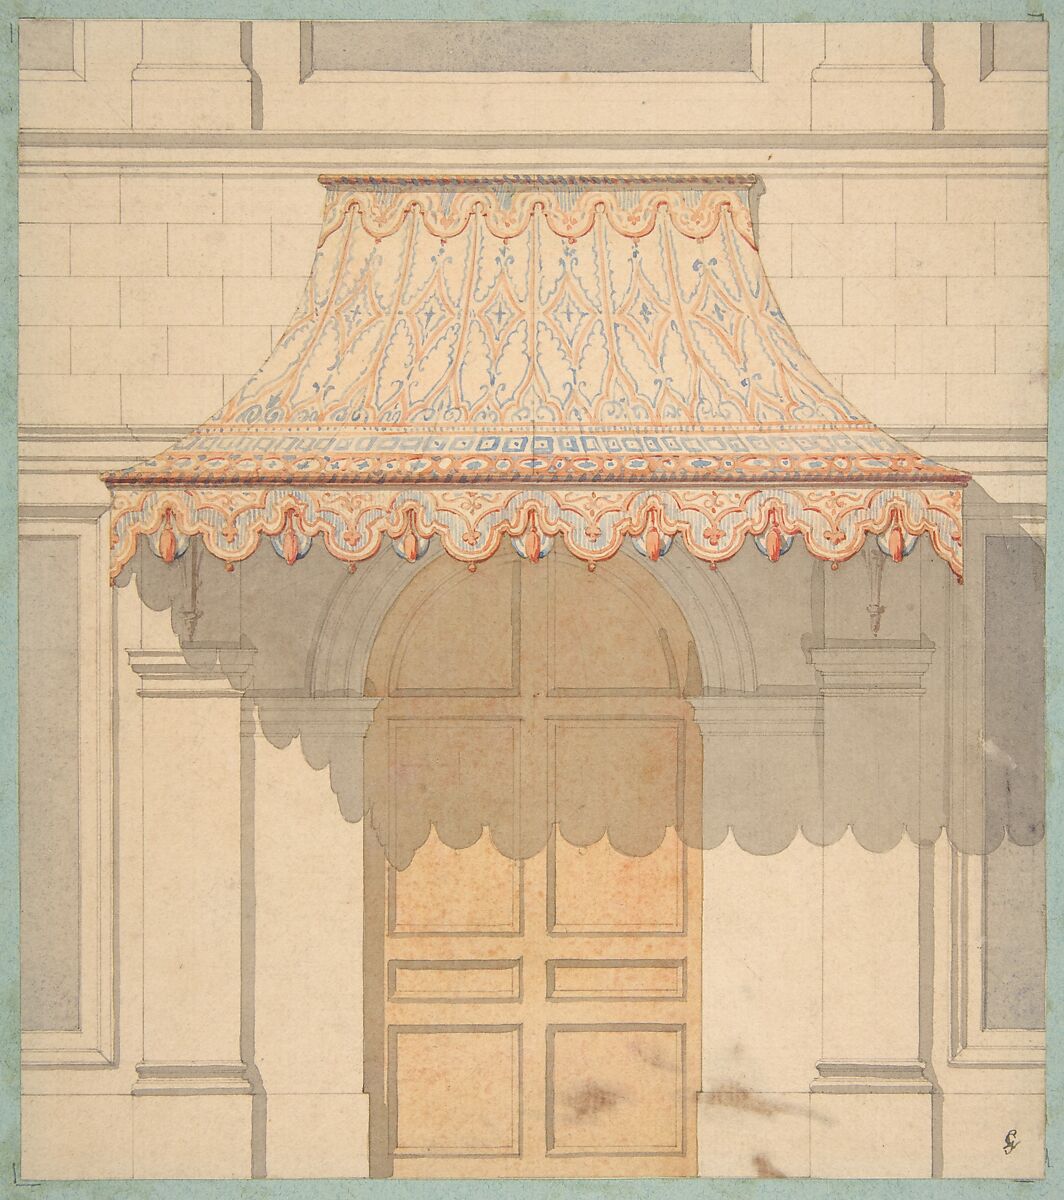 Design for an awning over a door, in Moorish style, Jules-Edmond-Charles Lachaise (French, died 1897), pen and ink, brush and wash, watercolor on laid paper; mounted on blue wove paper 